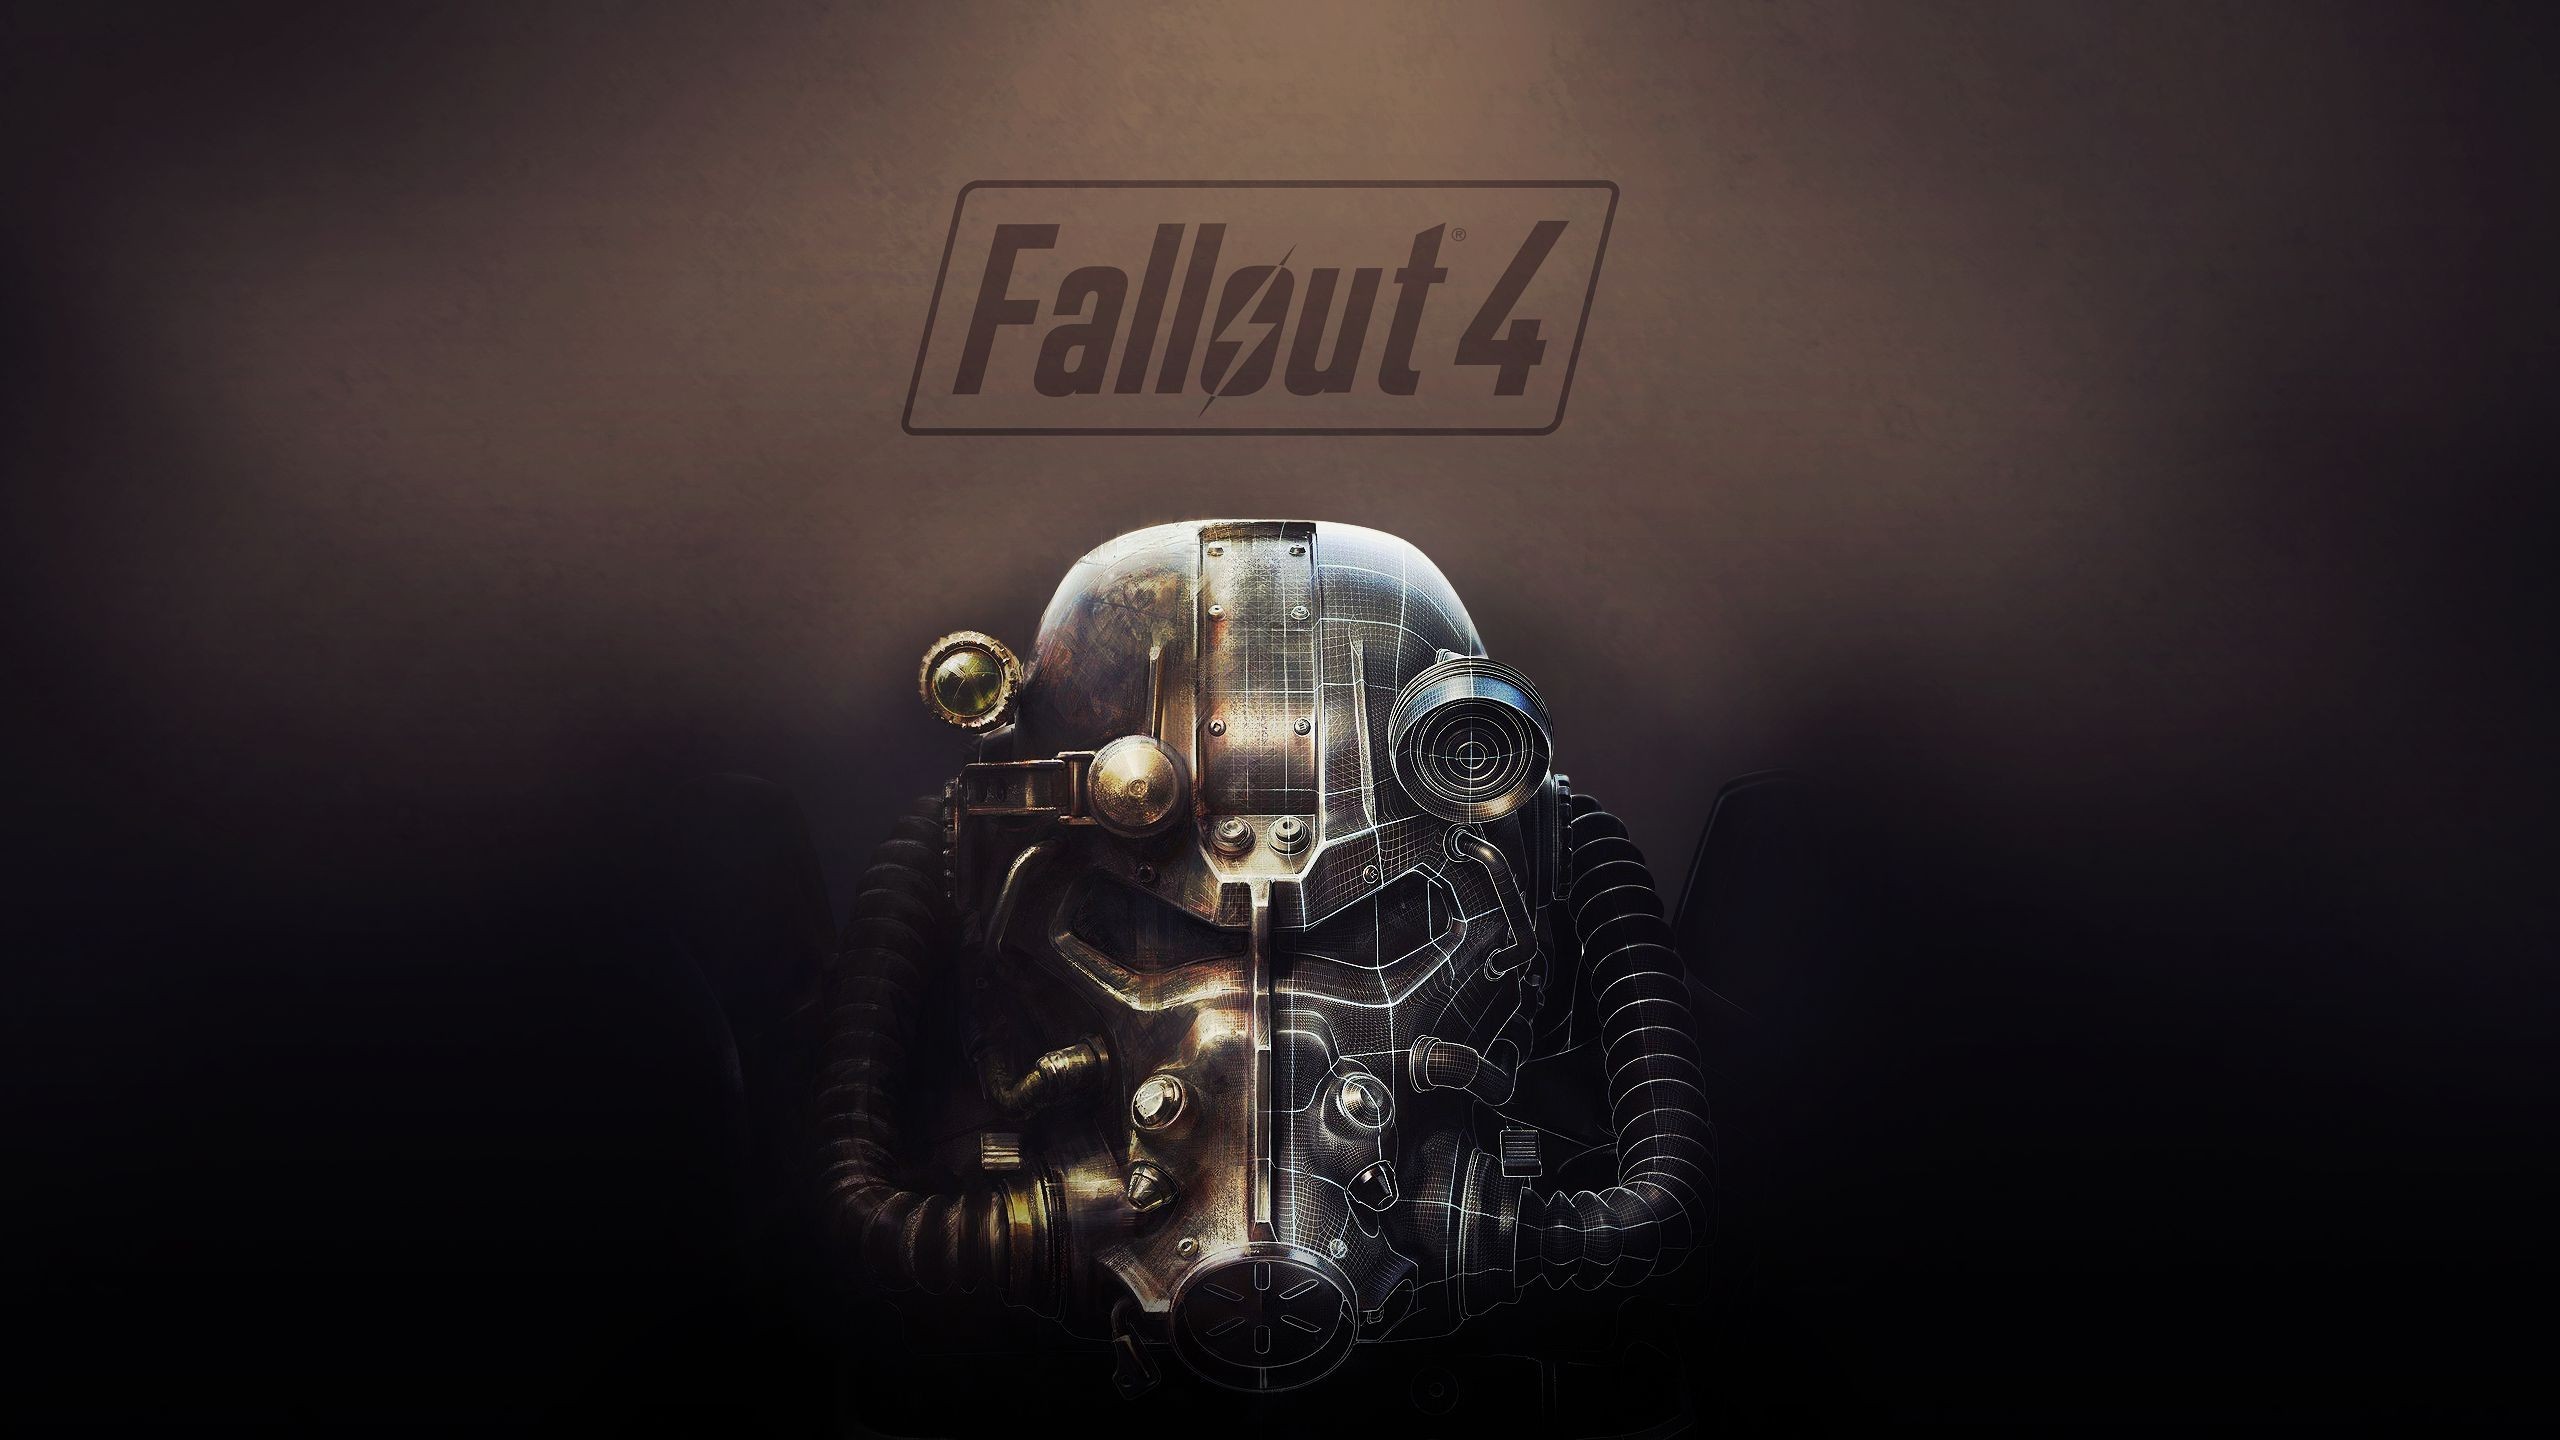 2560x1440 Fallout 4 [] (wallpapers.wallhaven.cc)